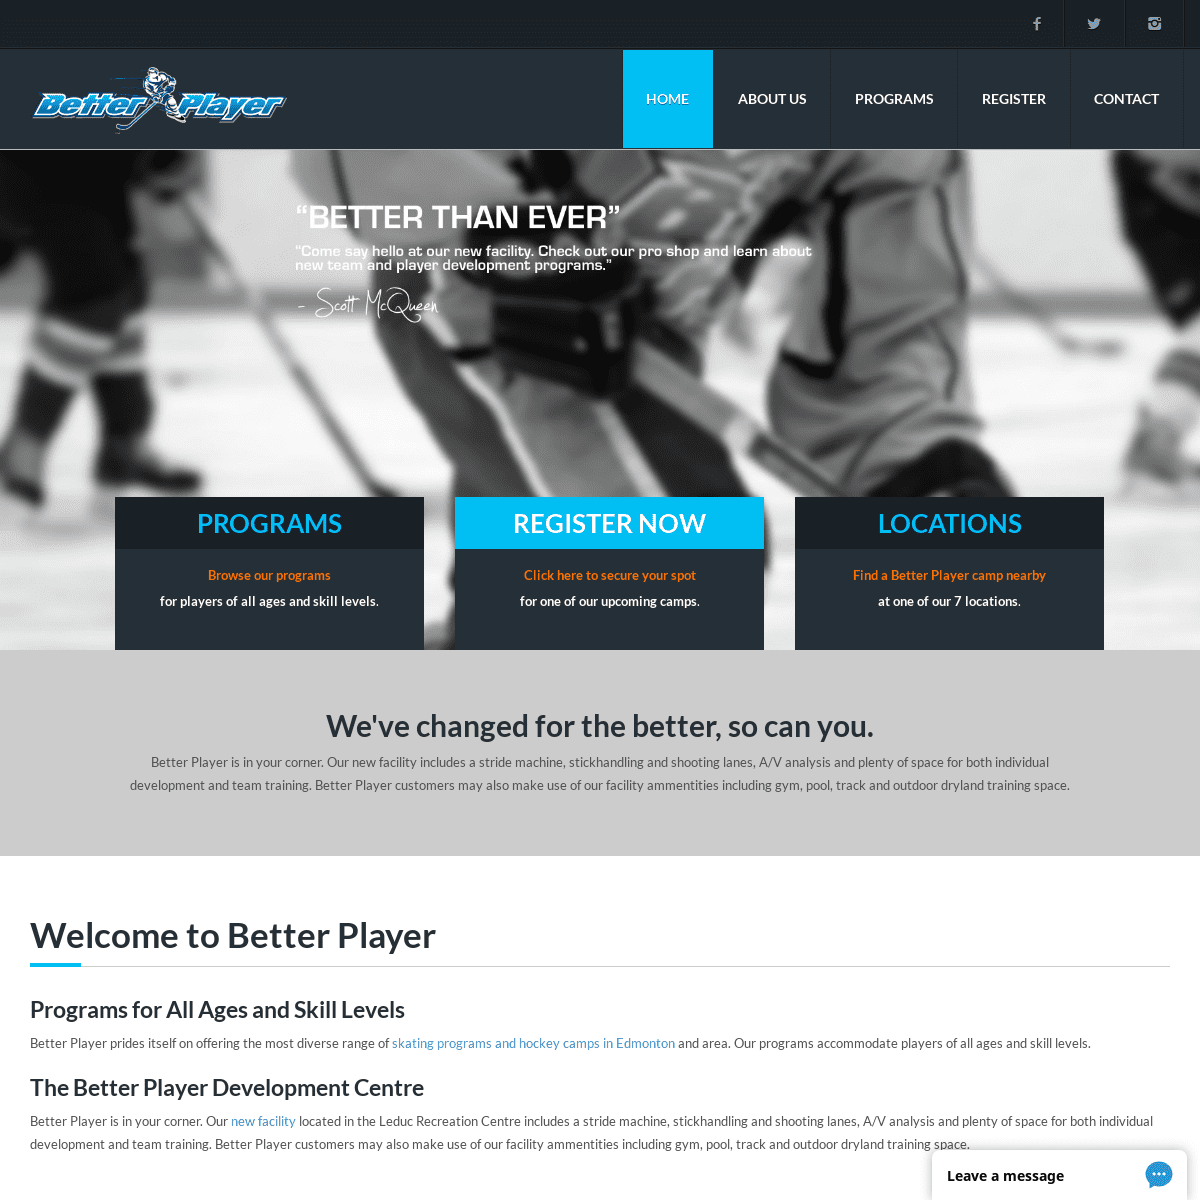 A complete backup of betterplayer.ca